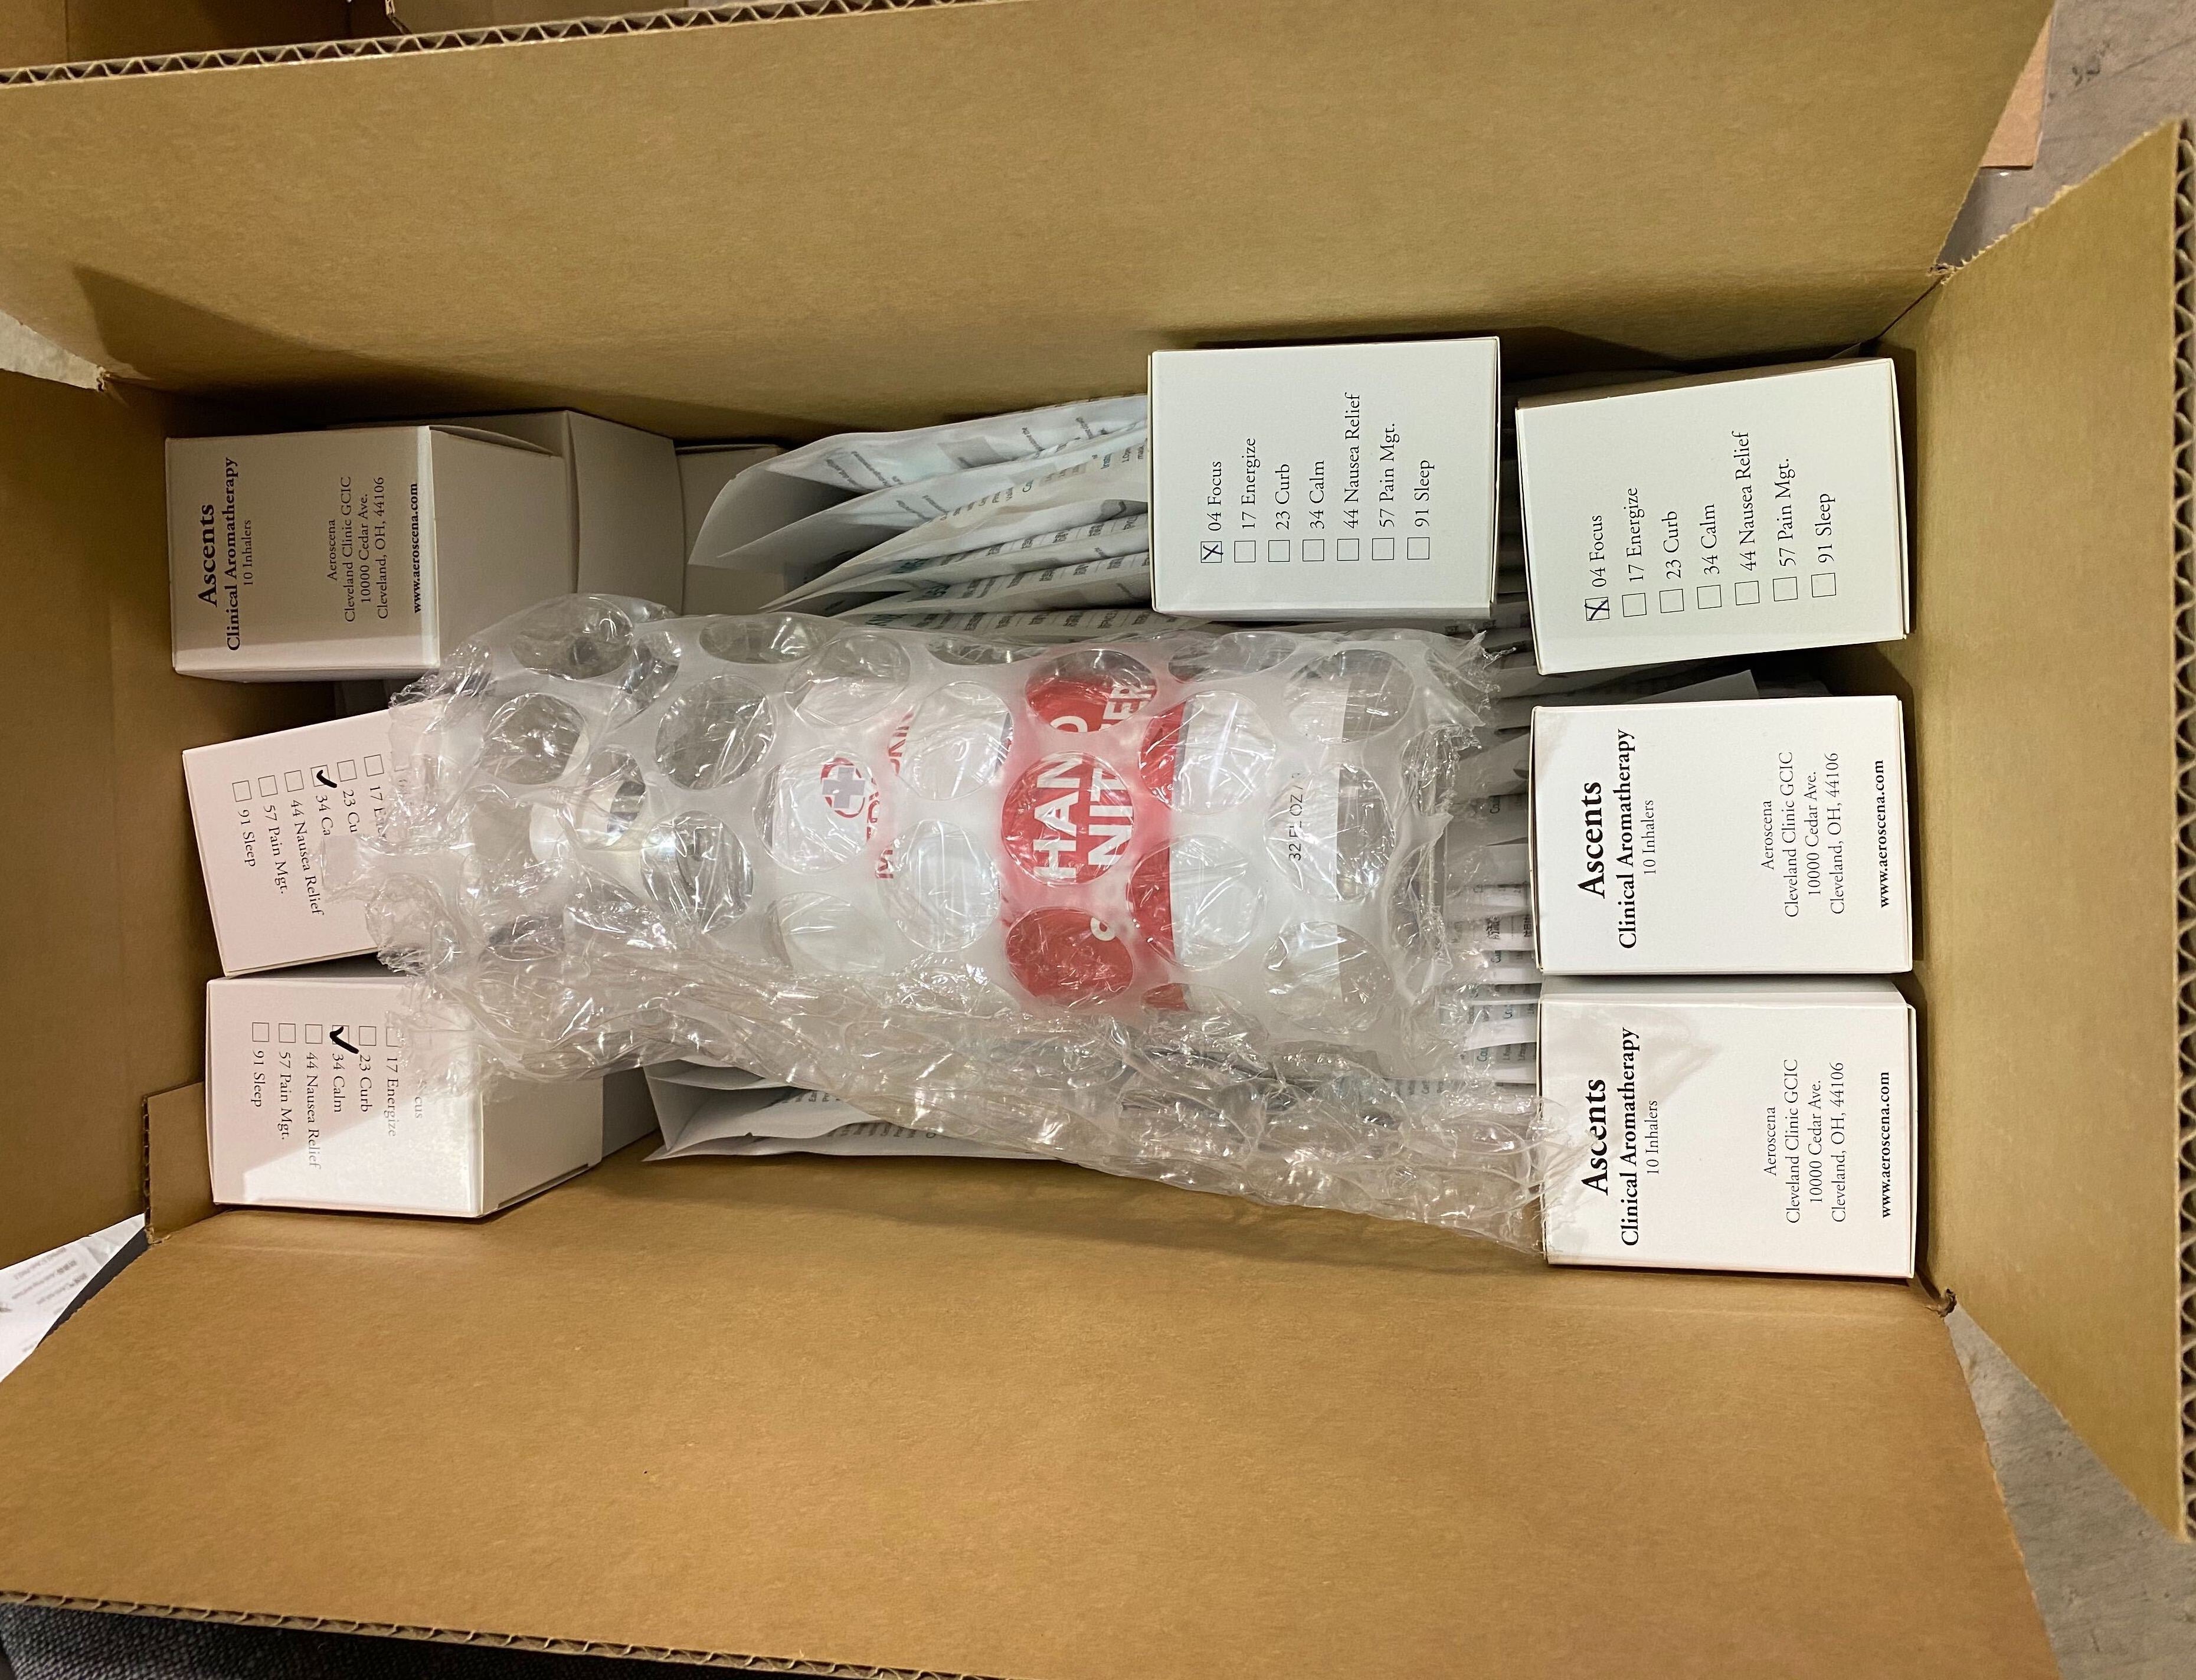 Global Clinical Aromatherapy Leader Aeroscena Donates PPE Care Packages to First-Line Medical Workers During the COVID-19 Pandemic